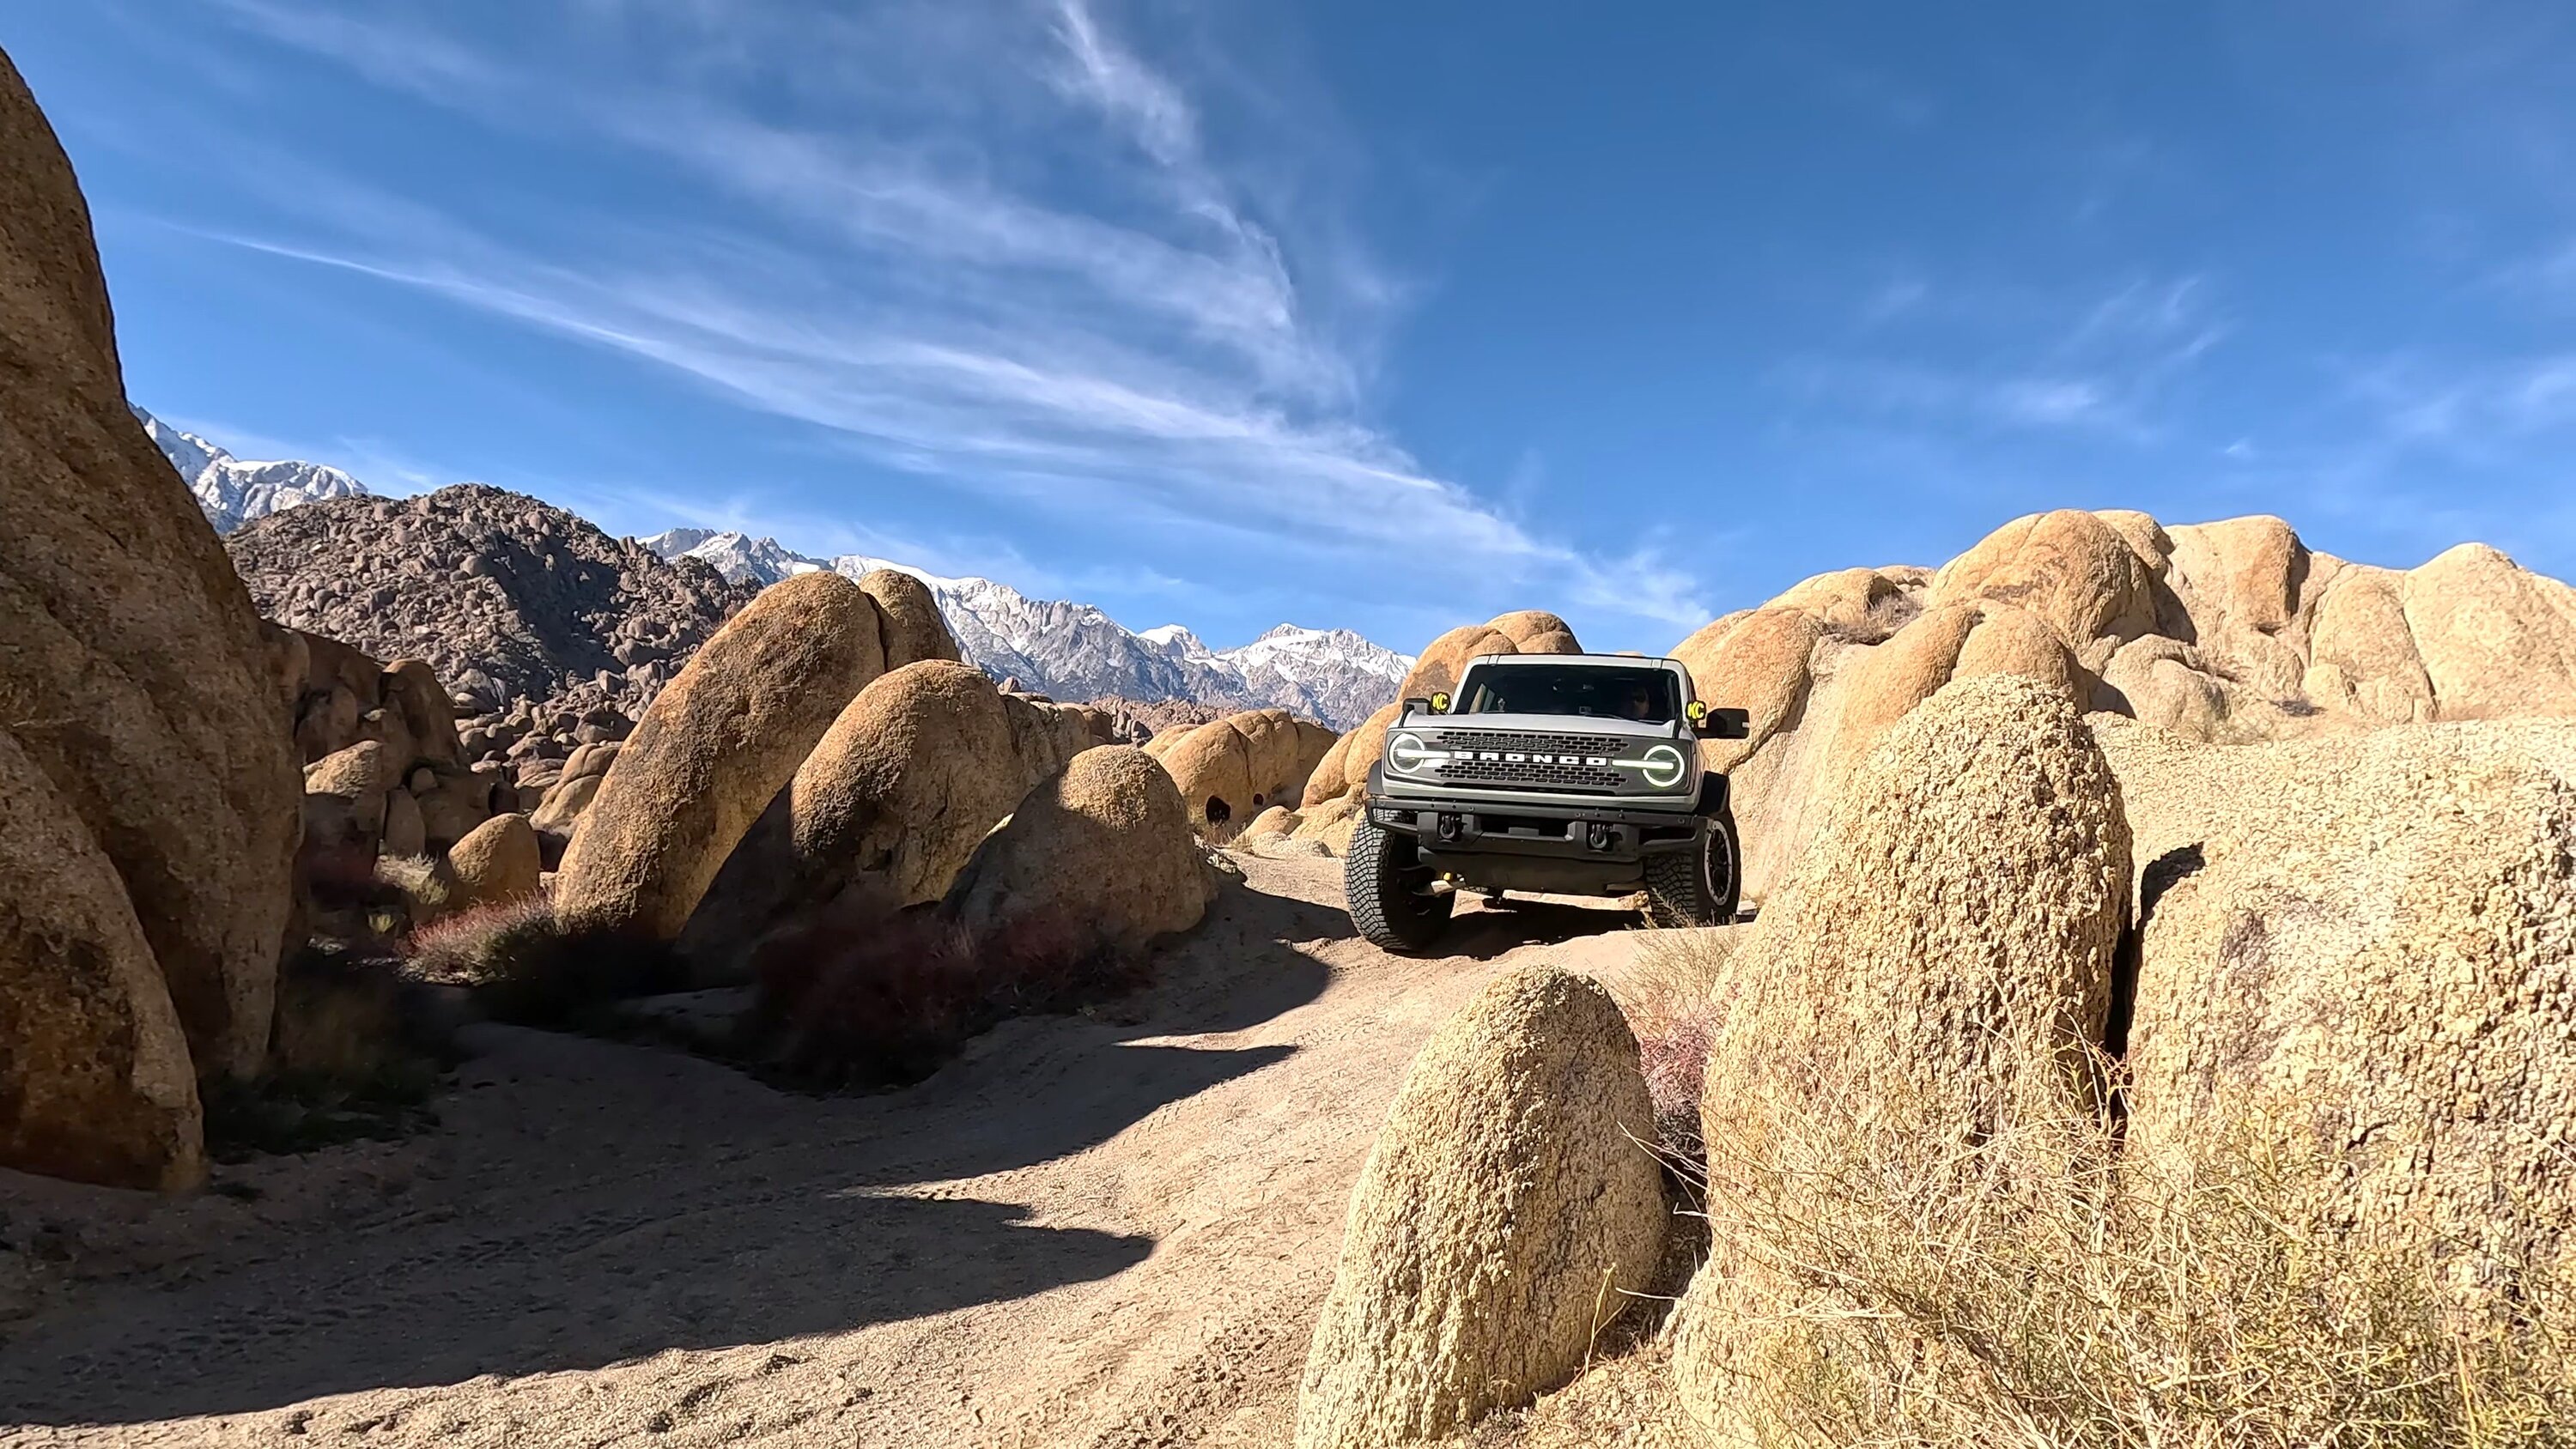 Ford Bronco Finding an EPIC campsite and sleeping in the back of the Bronco - Alabama Hills [pics and video] 1-broncodi